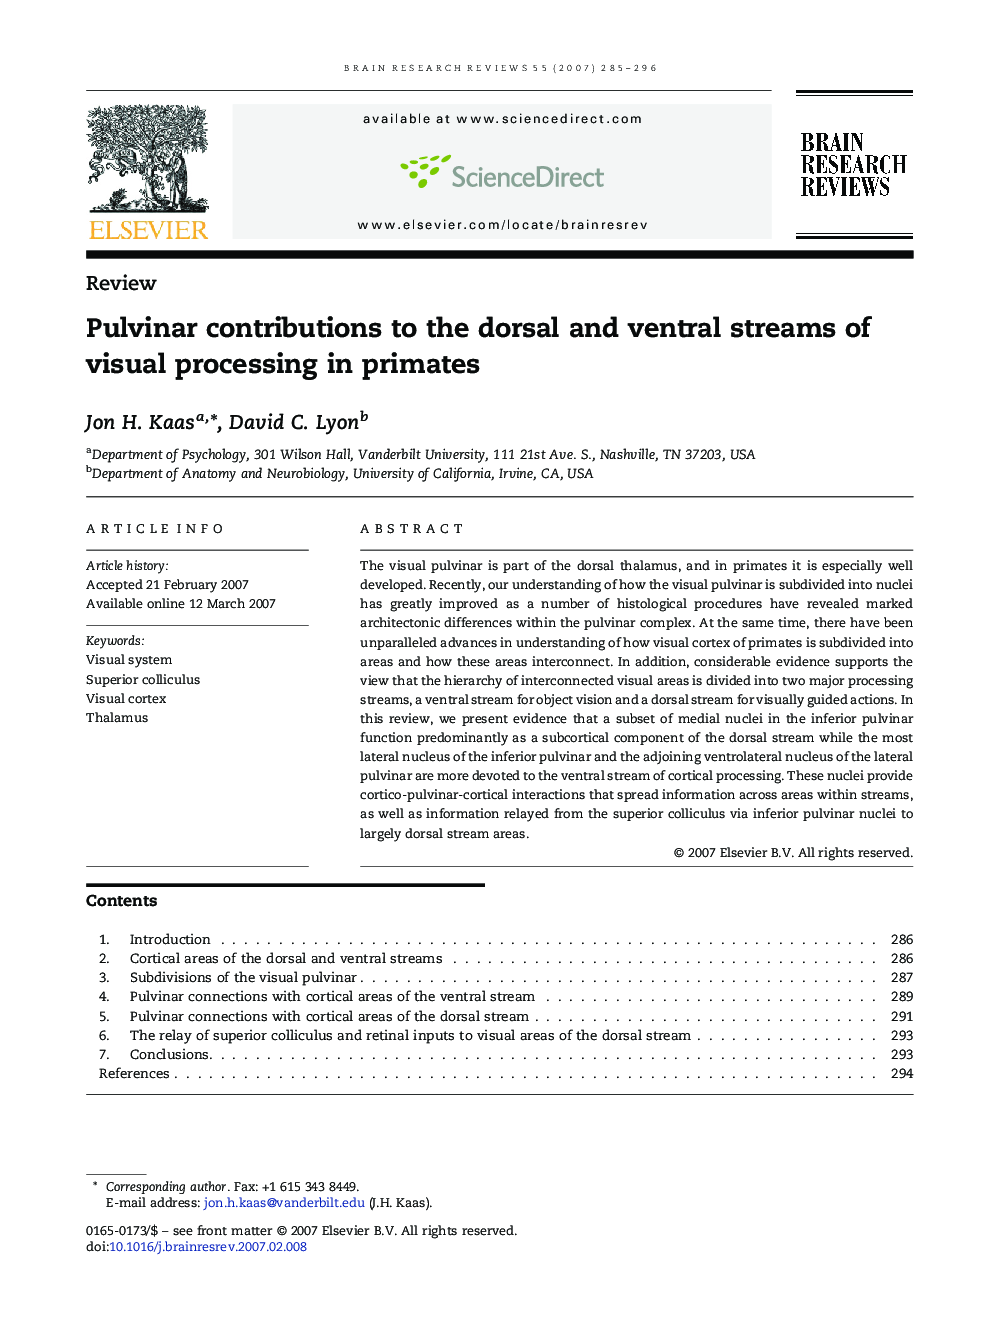 Pulvinar contributions to the dorsal and ventral streams of visual processing in primates